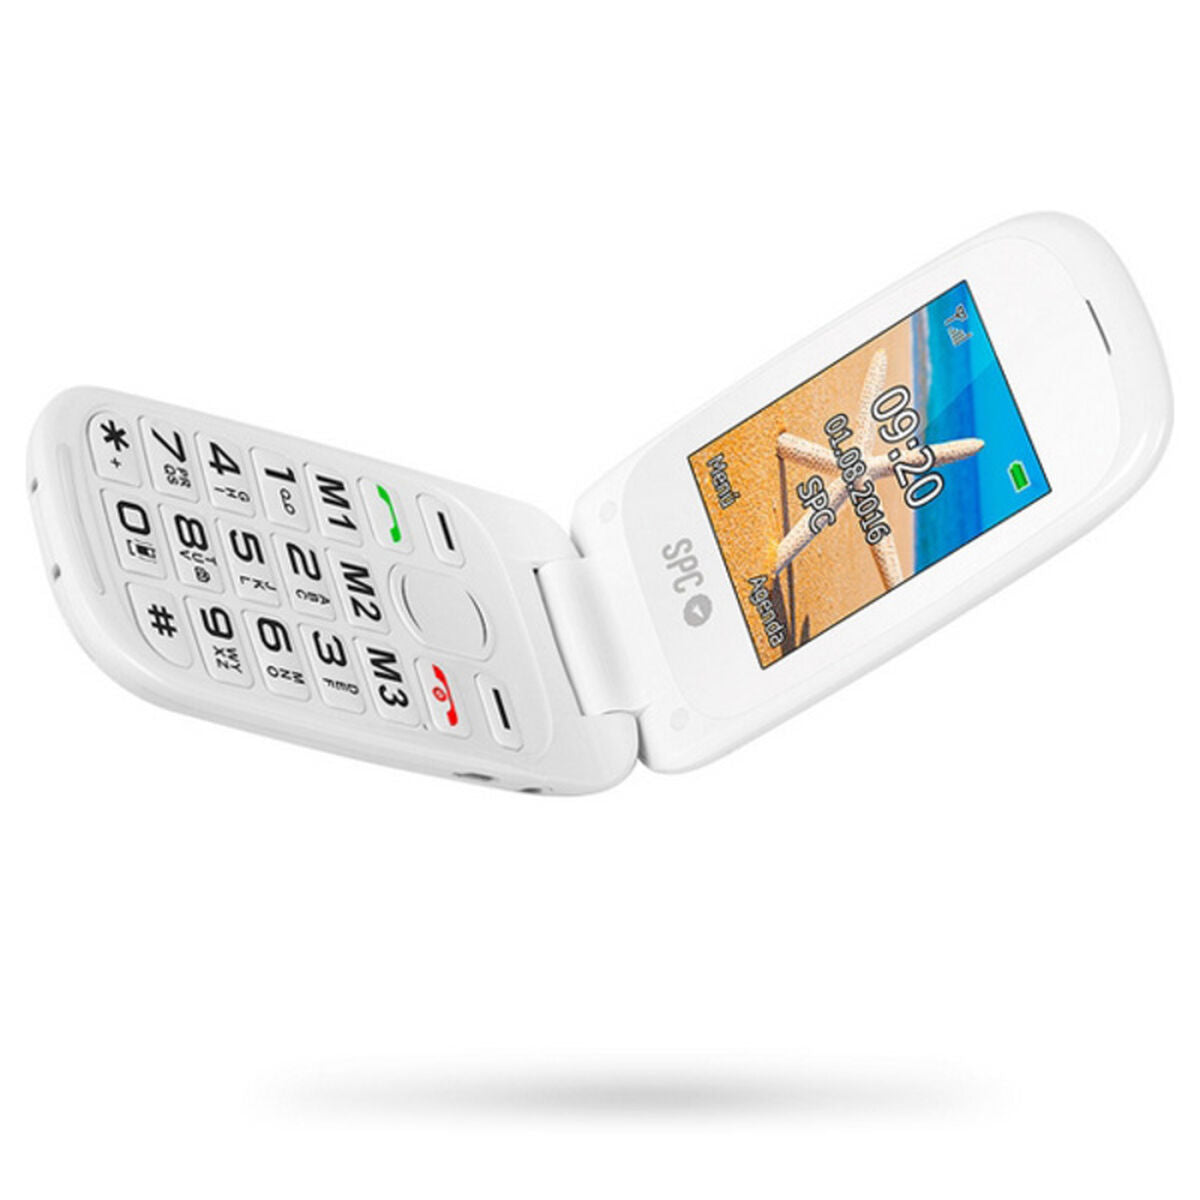 Mobile telephone for older adults SPC 2,4", SPC, Electronics, Mobile communication and accessories, mobile-telephone-for-older-adults-spc-2-4, :White, Brand_SPC, category-reference-2609, category-reference-2617, category-reference-2618, category-reference-t-19653, category-reference-t-4036, Colour_Black, Colour_White, Condition_NEW, entertainment, gadget, office, Price_50 - 100, telephones & tablets, Teleworking, wifi y bluetooth, RiotNook